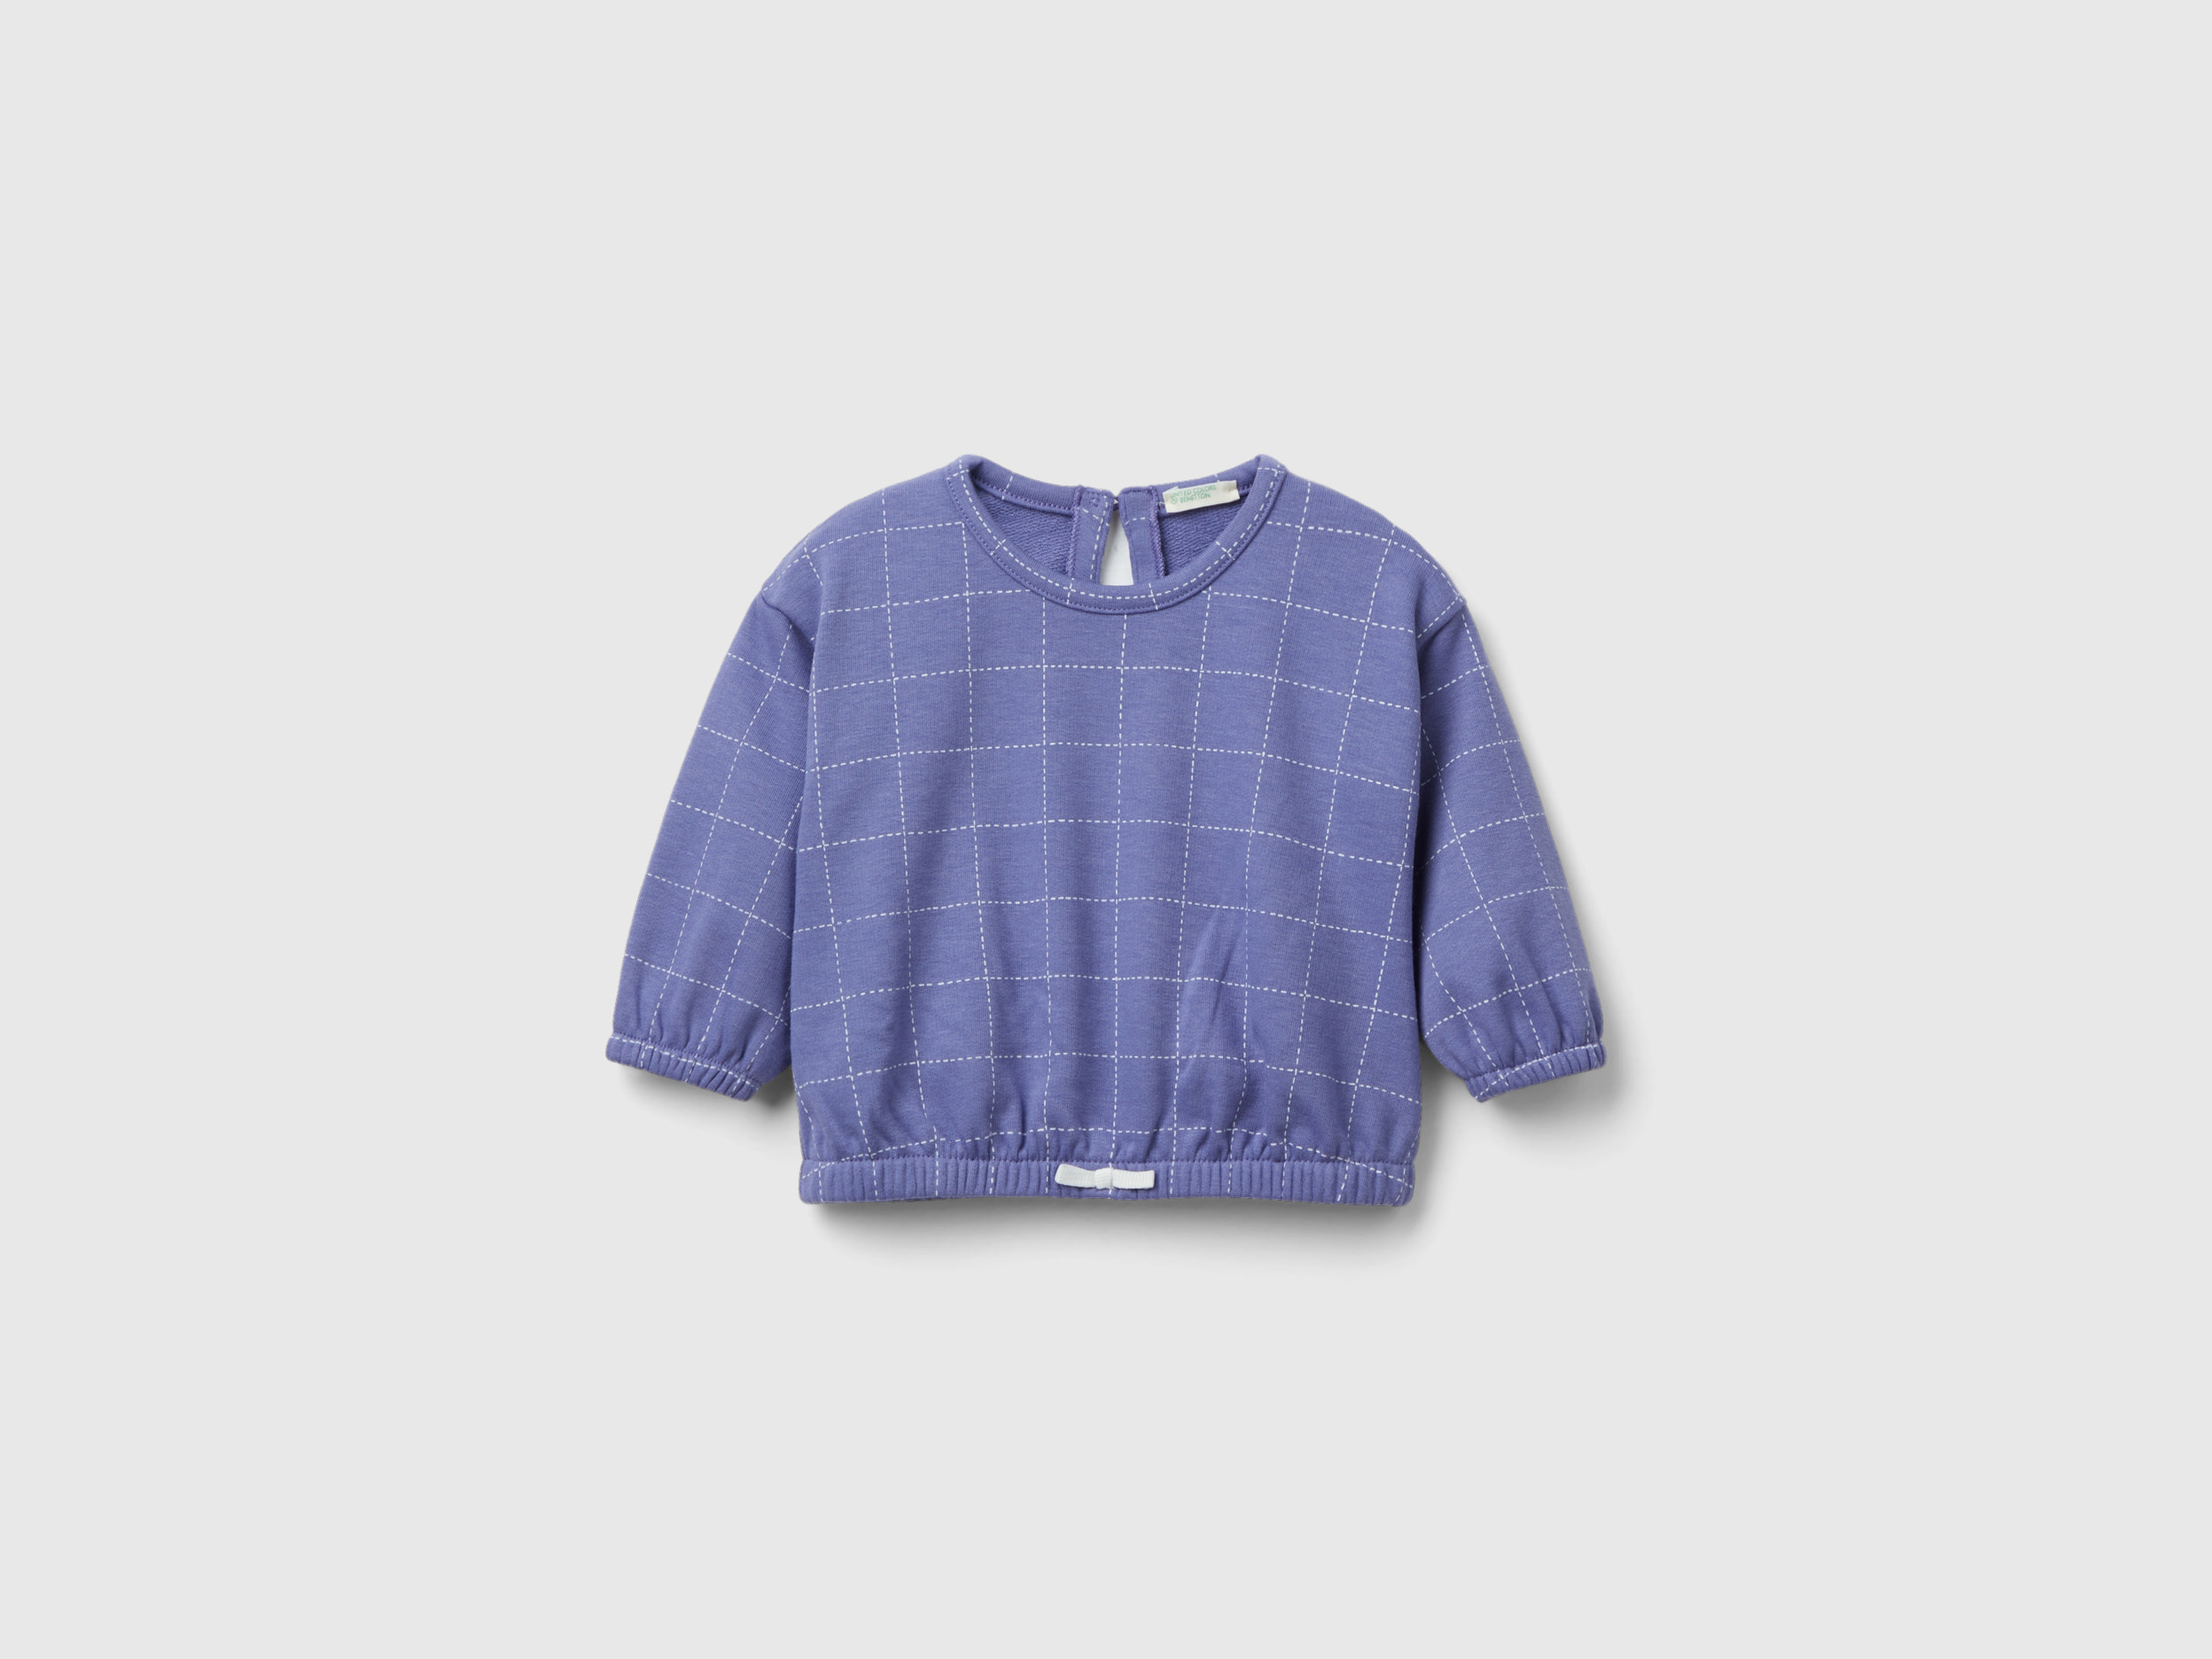 Benetton, Check Sweatshirt With Bow, size 9-12, Violet, Kids